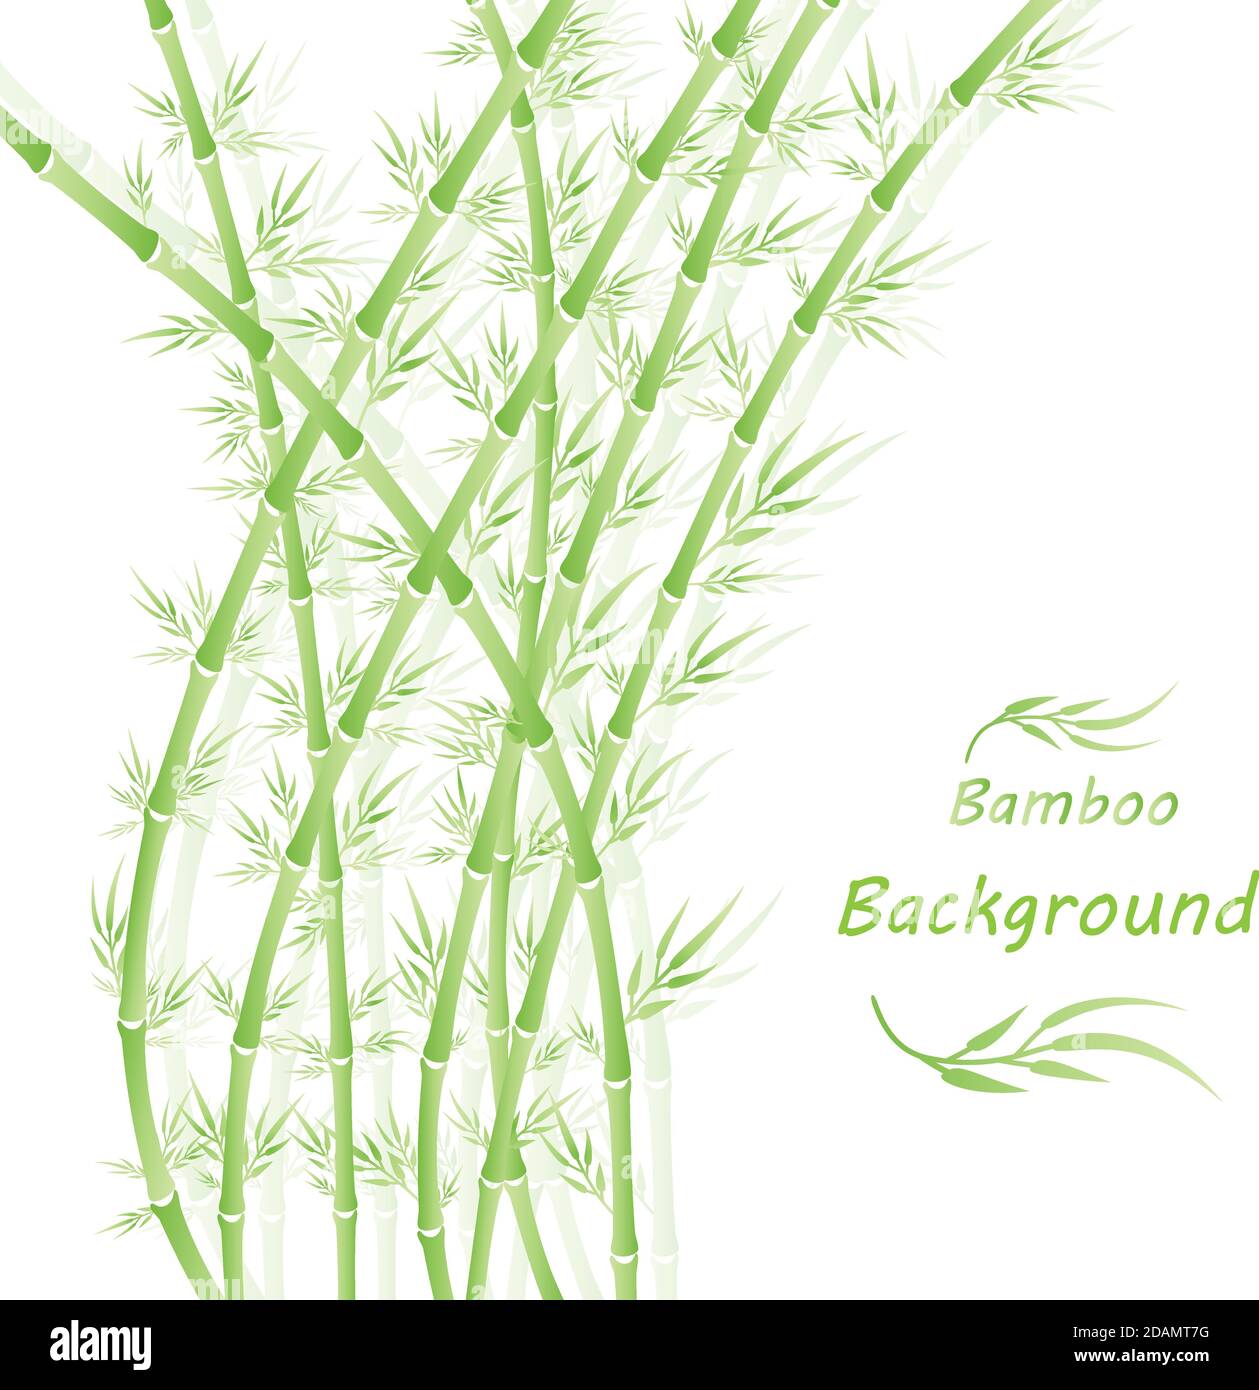 Bamboo forest.Chinese or japanese bamboo grass green background art design.Vector illustration.Eps10 Stock Vector